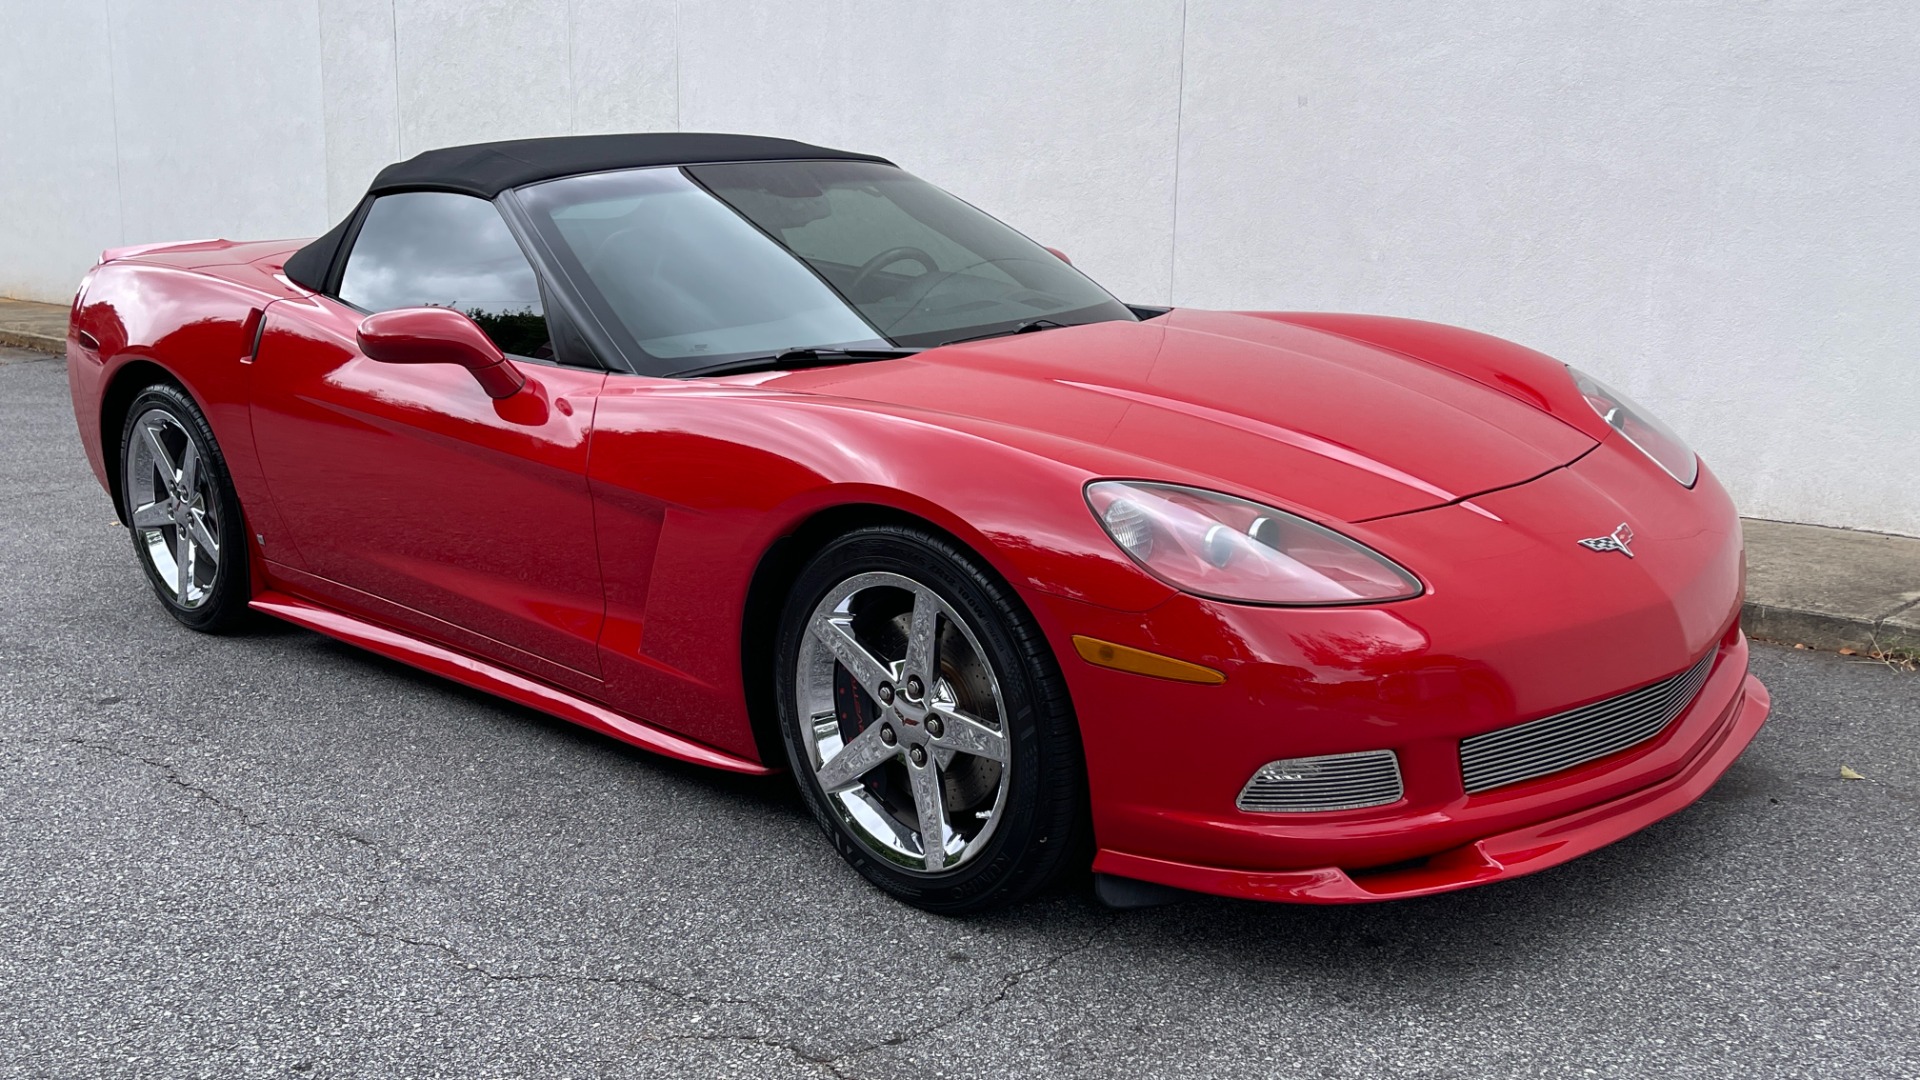 Used 2007 Chevrolet Corvette CONVERTIBLE / CORSA EXHAUST / CHROME WHEELS / LEATHER / AUTOMATIC for sale Sold at Formula Imports in Charlotte NC 28227 8